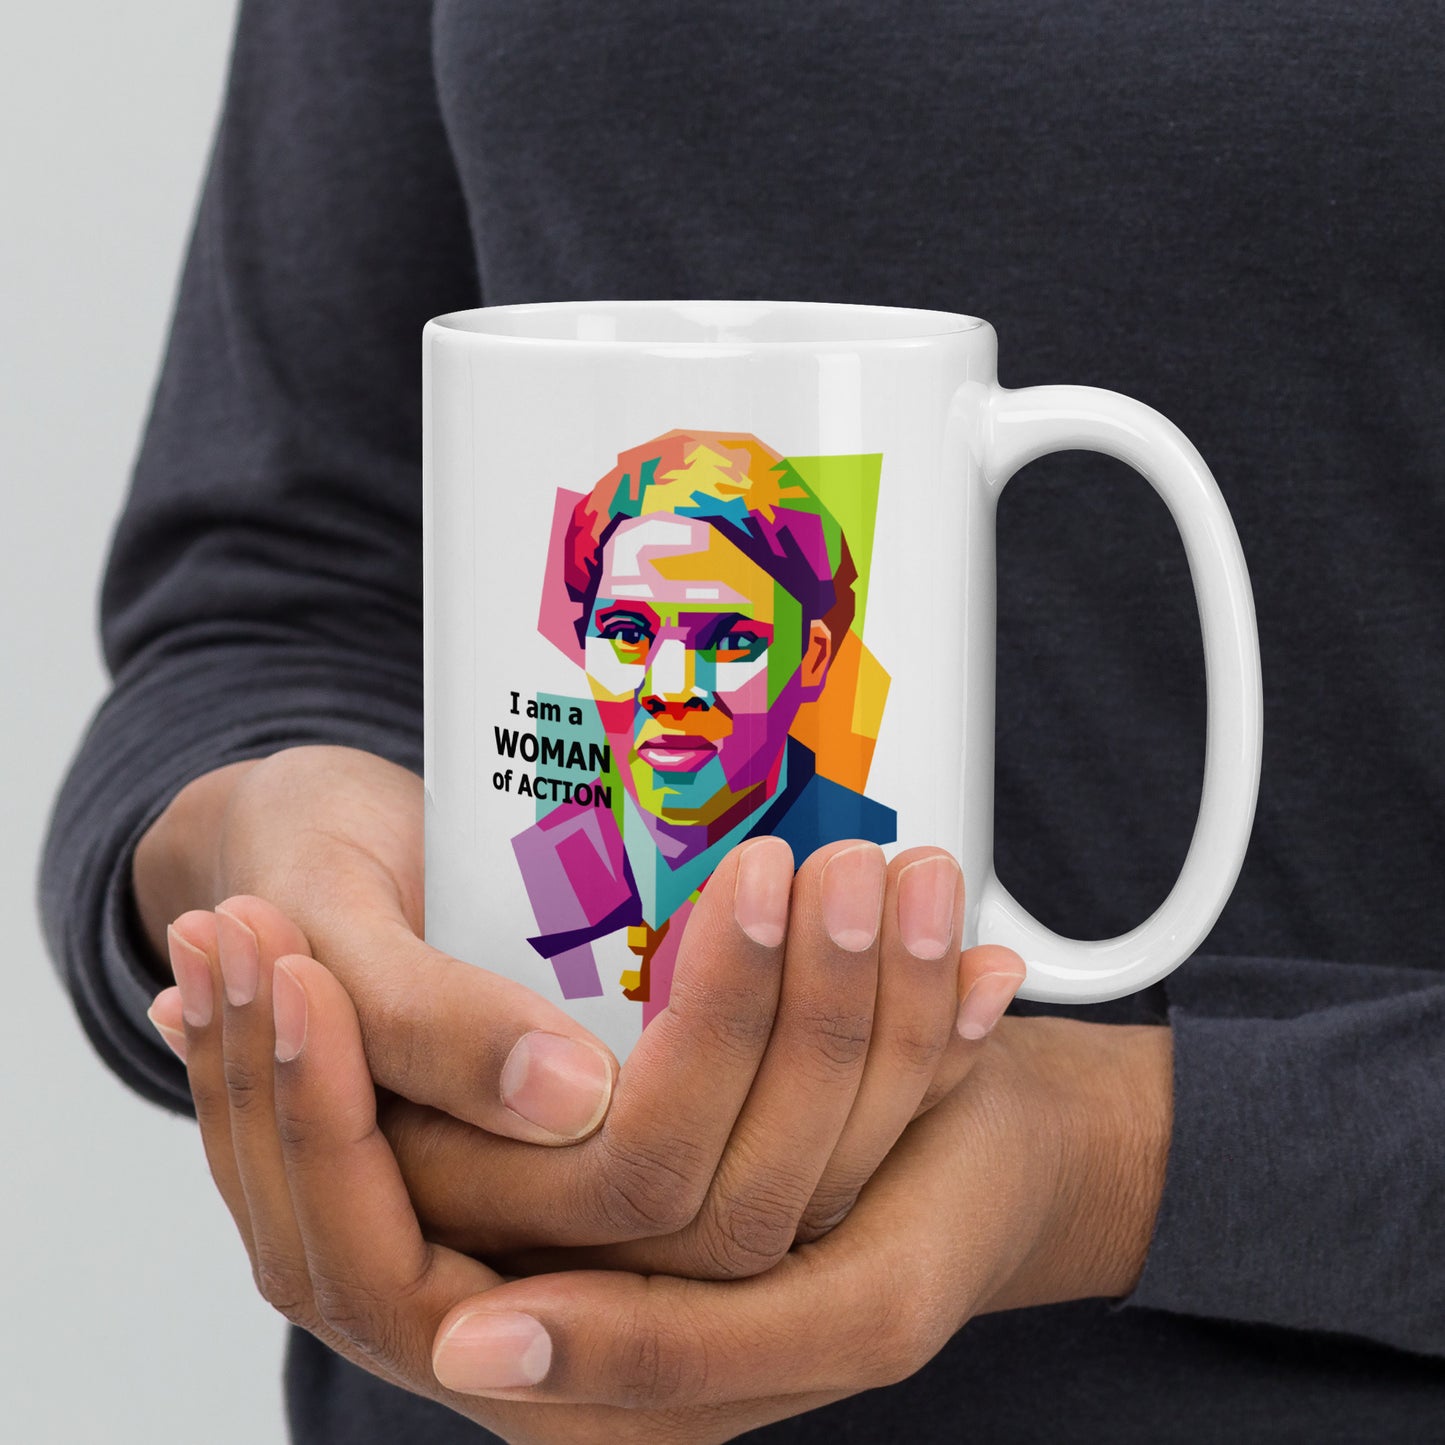 Harriet Tubman A Woman of Action White glossy mug